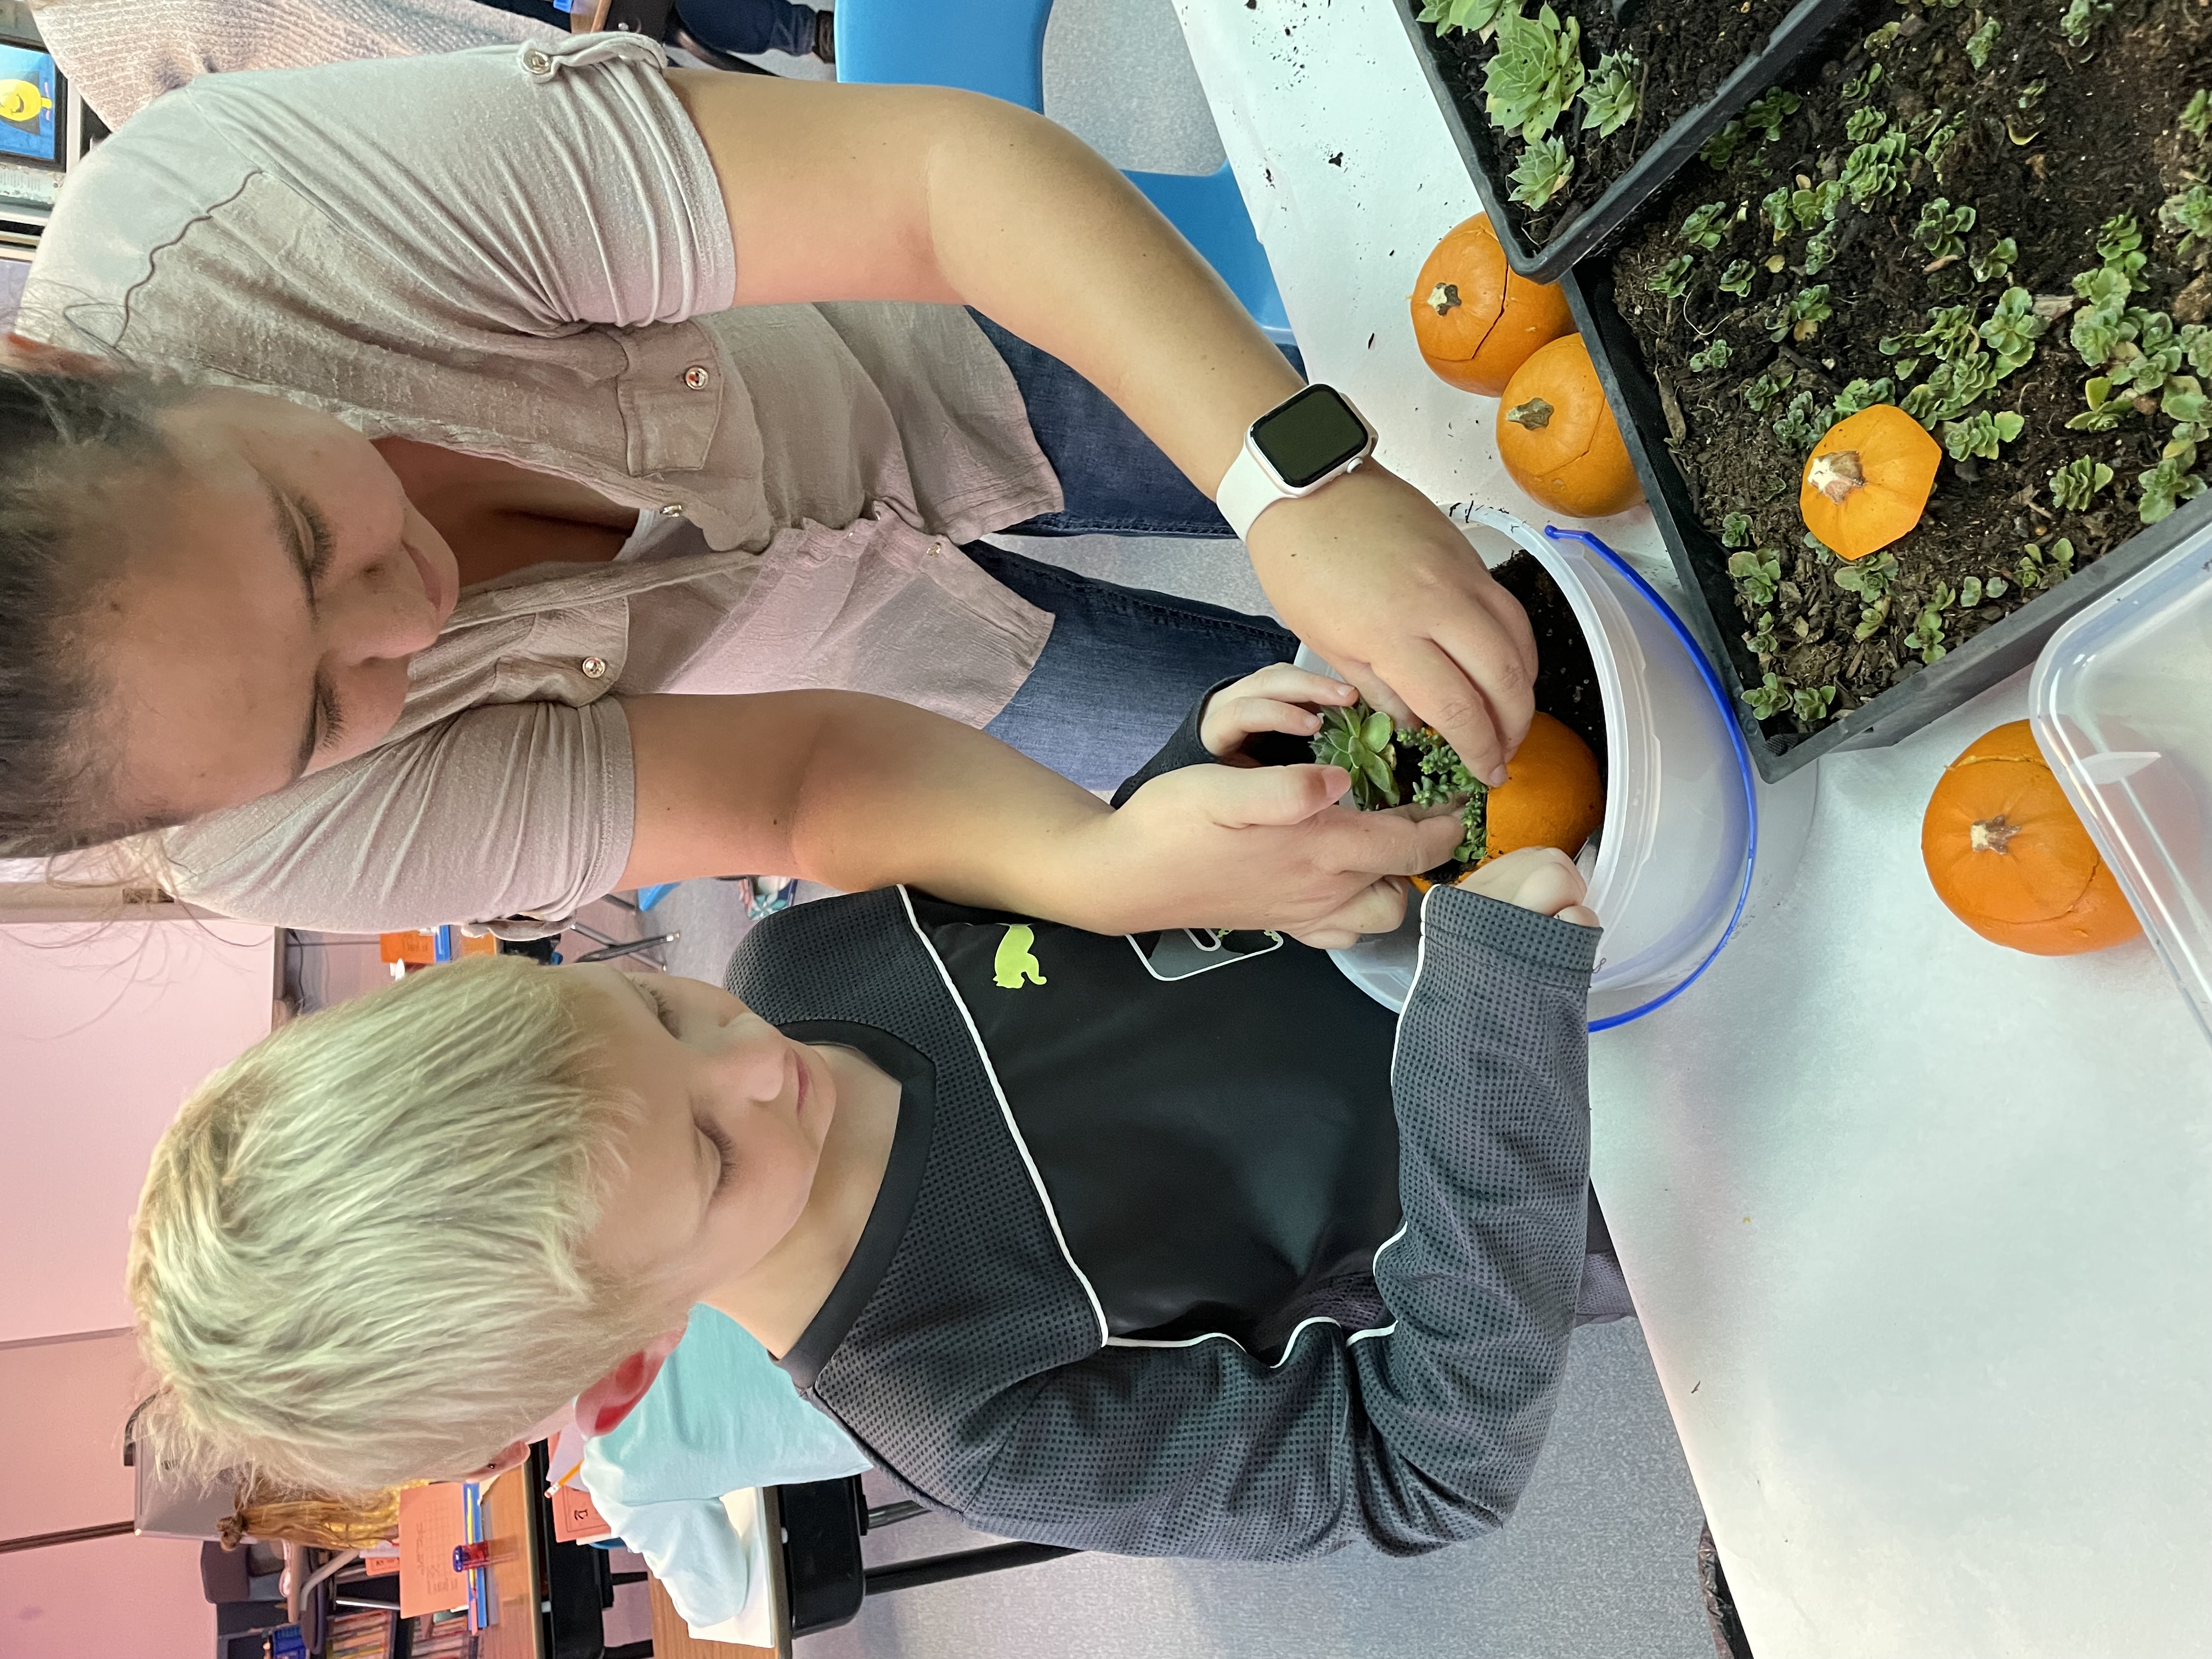 Student and teacher planting in a hollowed out orange fruit